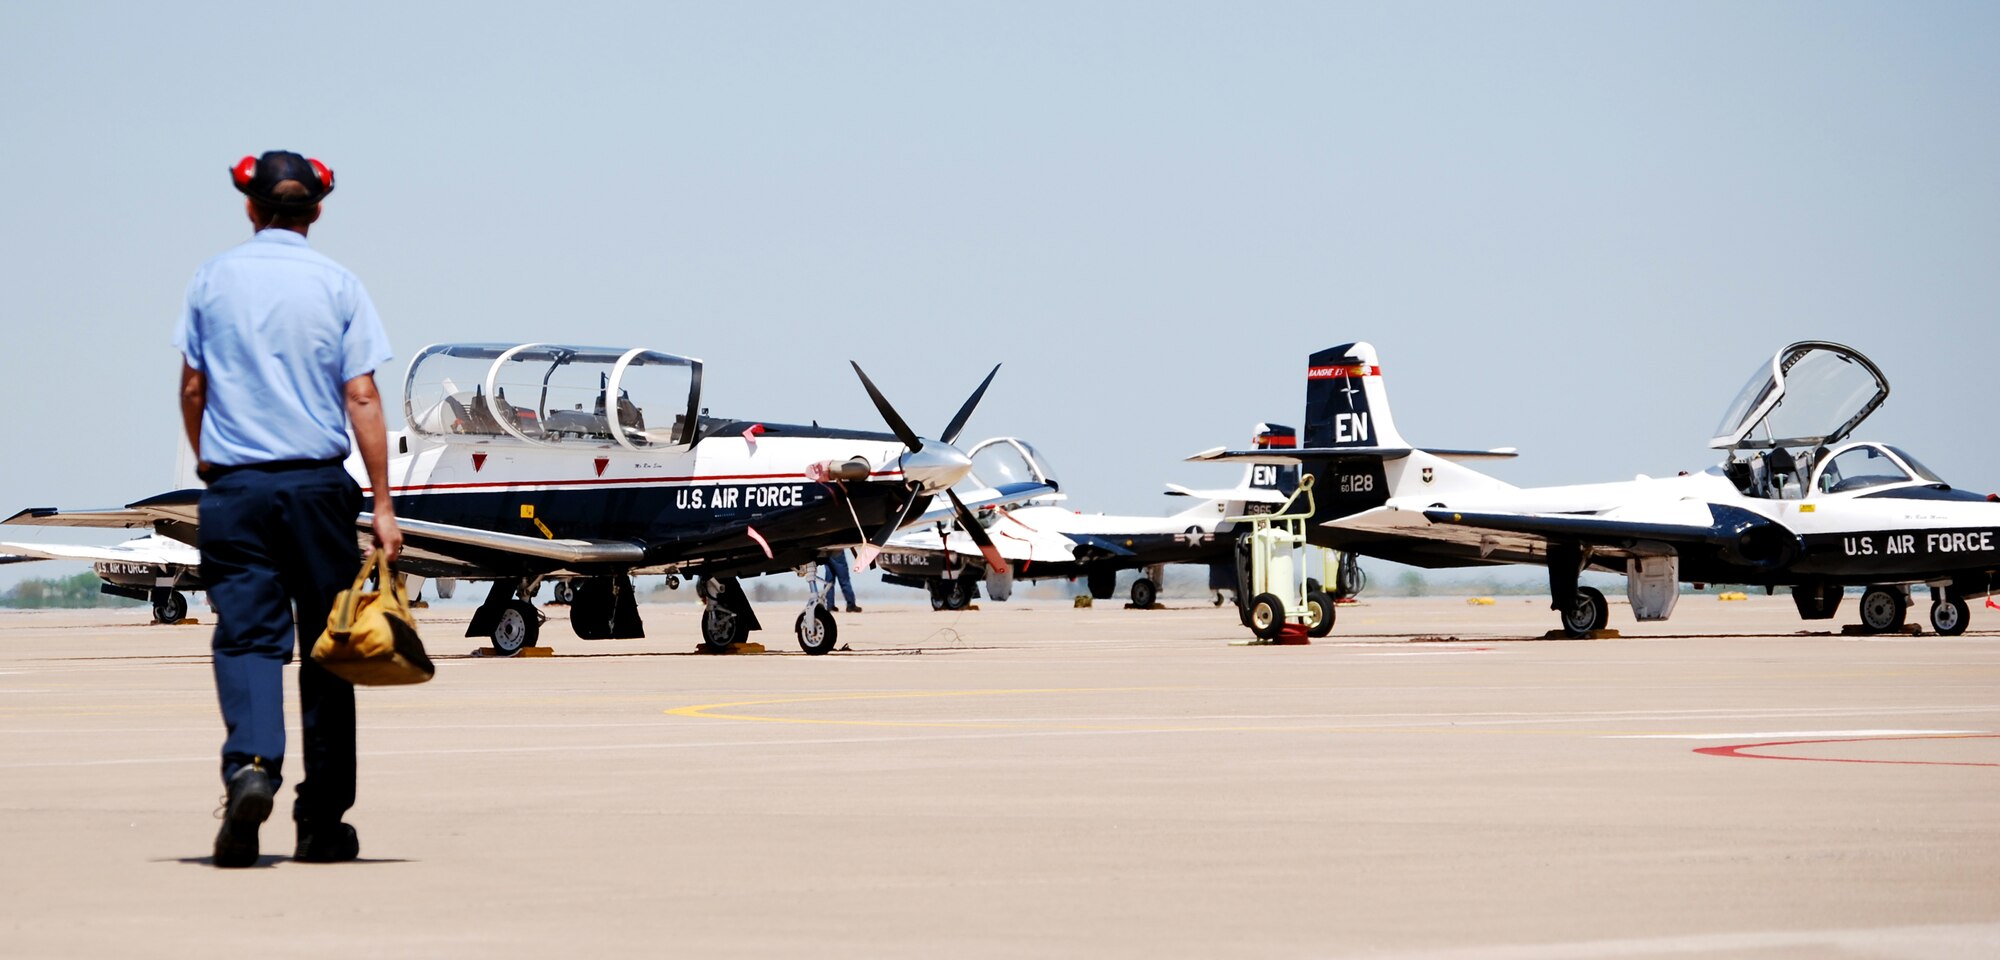 Steve Chandler, a T-37 Tweet crew chief with Lear Siegler Services, Inc., makes his daily walk out to the flight line to retrieve and launch the introductory training jet. Crew chiefs have mixed emotions about the departure of the antiquated trainer and the arrival of the T-6A Texan II, its replacement. (U.S. Air Force photo/John Ingle)